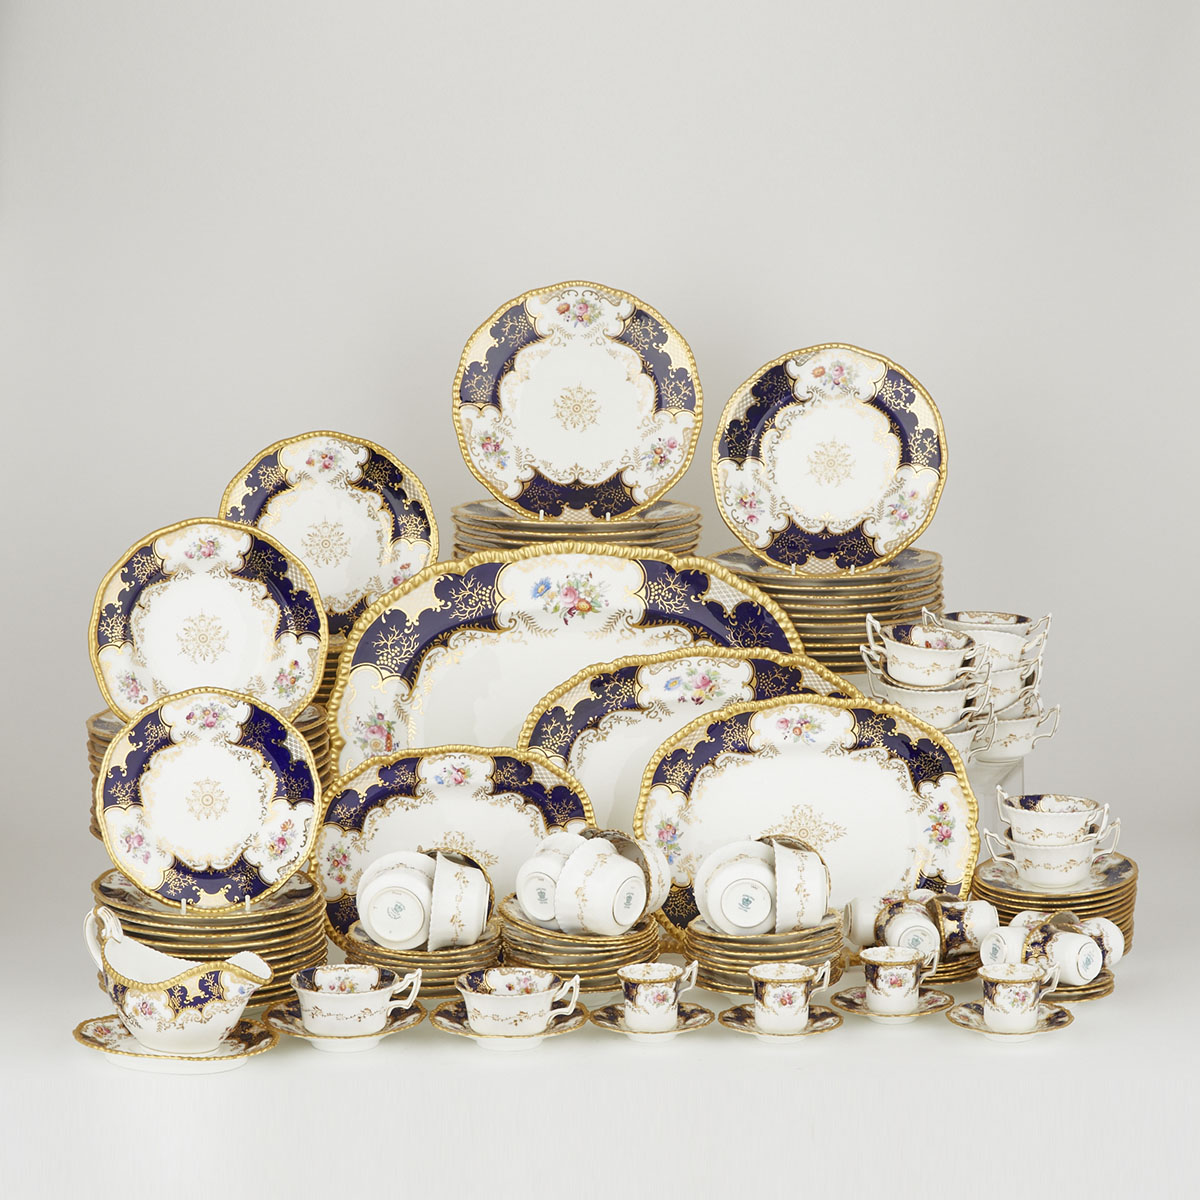 Coalport Floral Paneled Blue and Gilt Service, early 20th century